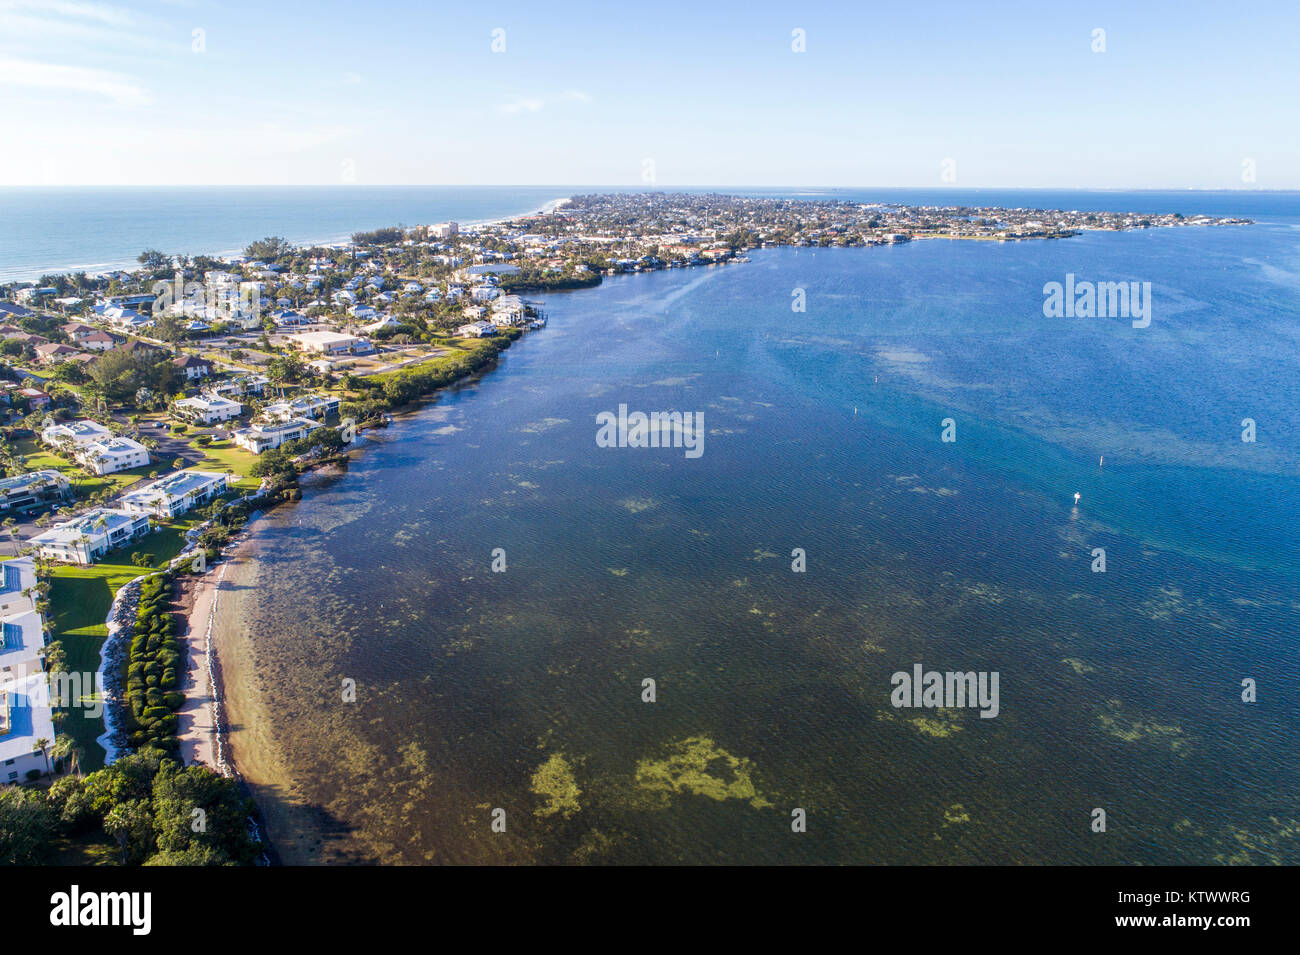 Anna Maria Island Florida,Holmes Beach,Gulf of Mexico,Tampa Bay,houses homes residences,aerial overhead view,barrier,FL17121459d Stock Photo